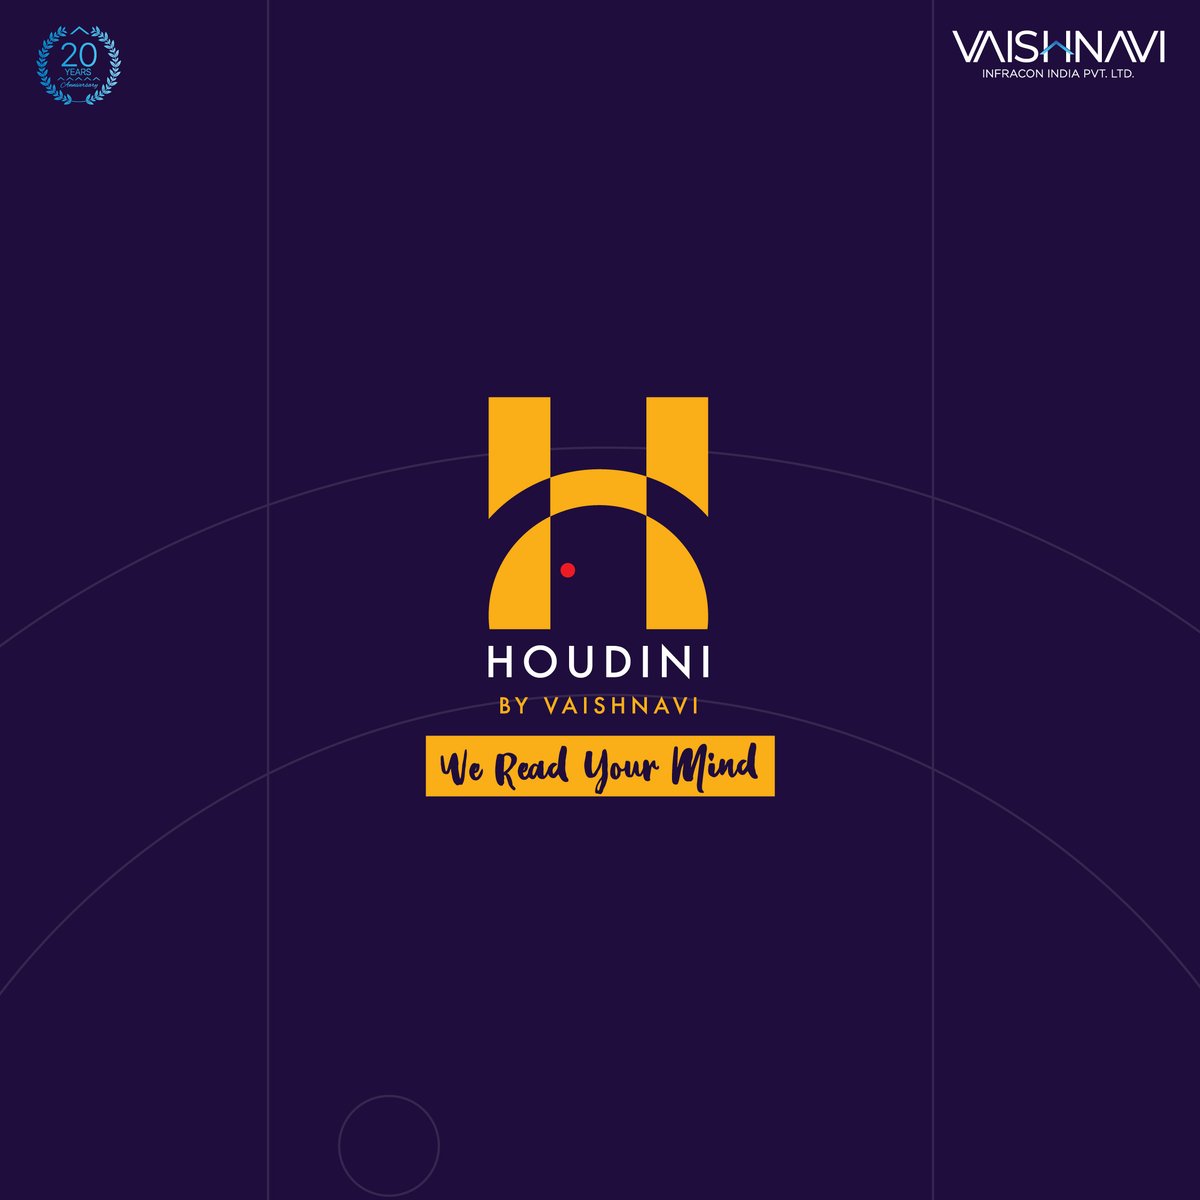 There are no more secrets. The code has been broken and the surprise reveal is out! Keep an eye on this space to know more. #Houdini #VaishnaviHoudini #MagicalHome #UpcomingProject #WeReadYourMind #LuxuryGatedCommunity #Bandlagudajagir #Kismatpur #SustainableLiving #Hyderabad